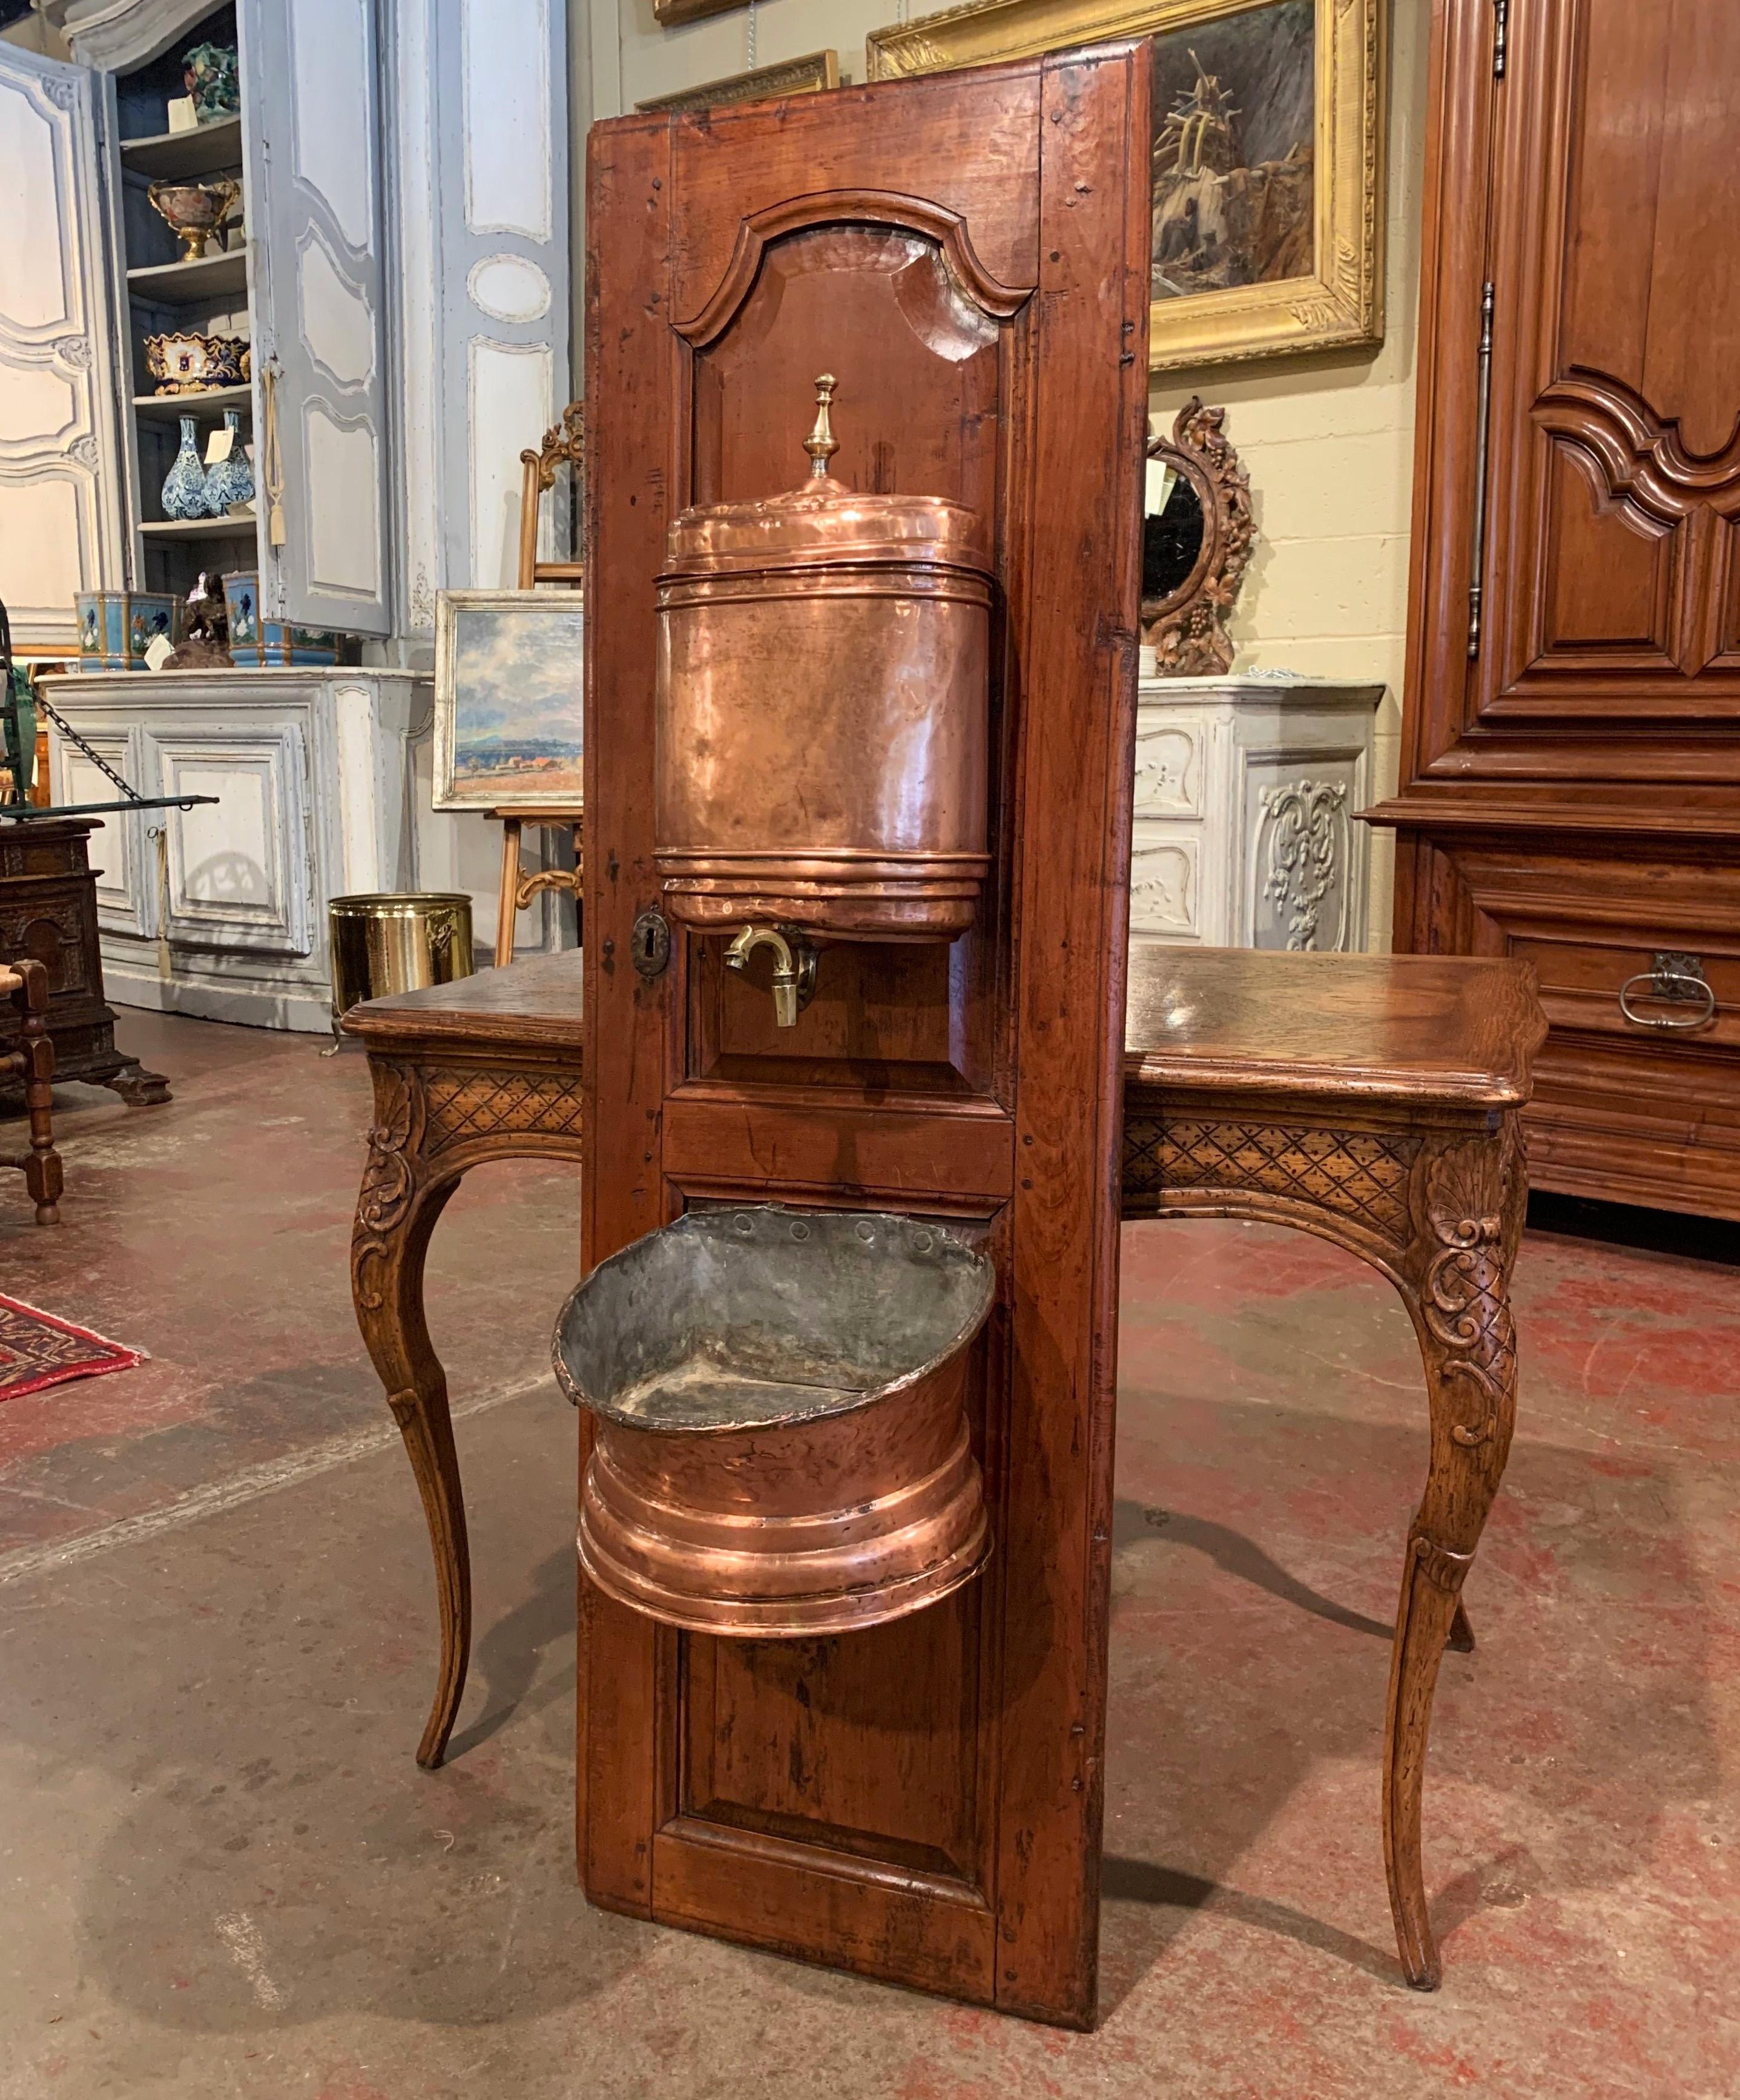 Crafted in Normandy, France circa 1780, and mounted on a carved fruit wood door, the antique brass lavabo features the original two-piece lavabo; a demilune basin at the base, and a top reservoir with lid and brass faucet. The fountain is in